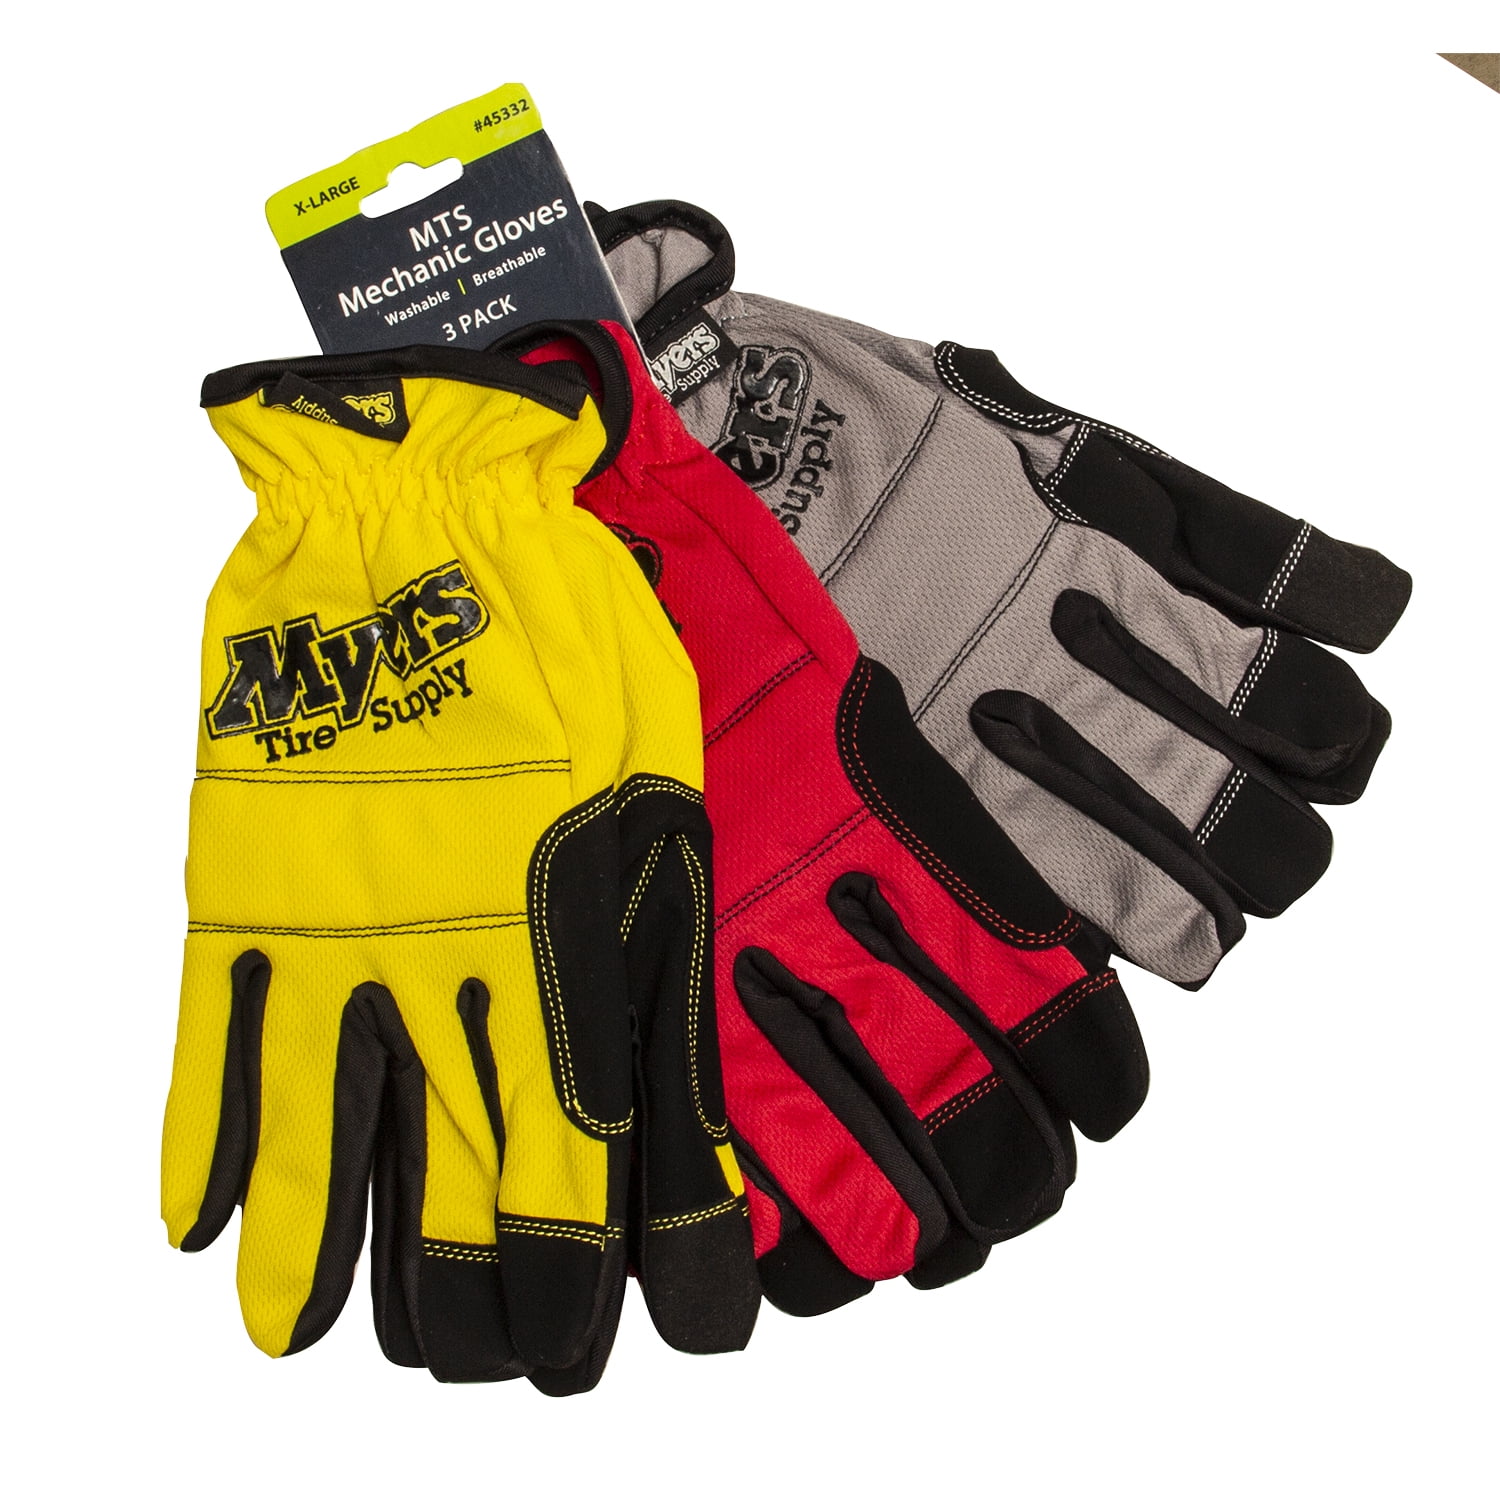 Myers Tire Supply Mechanics Gloves, Safety Work Gloves, XLarge 3pack 